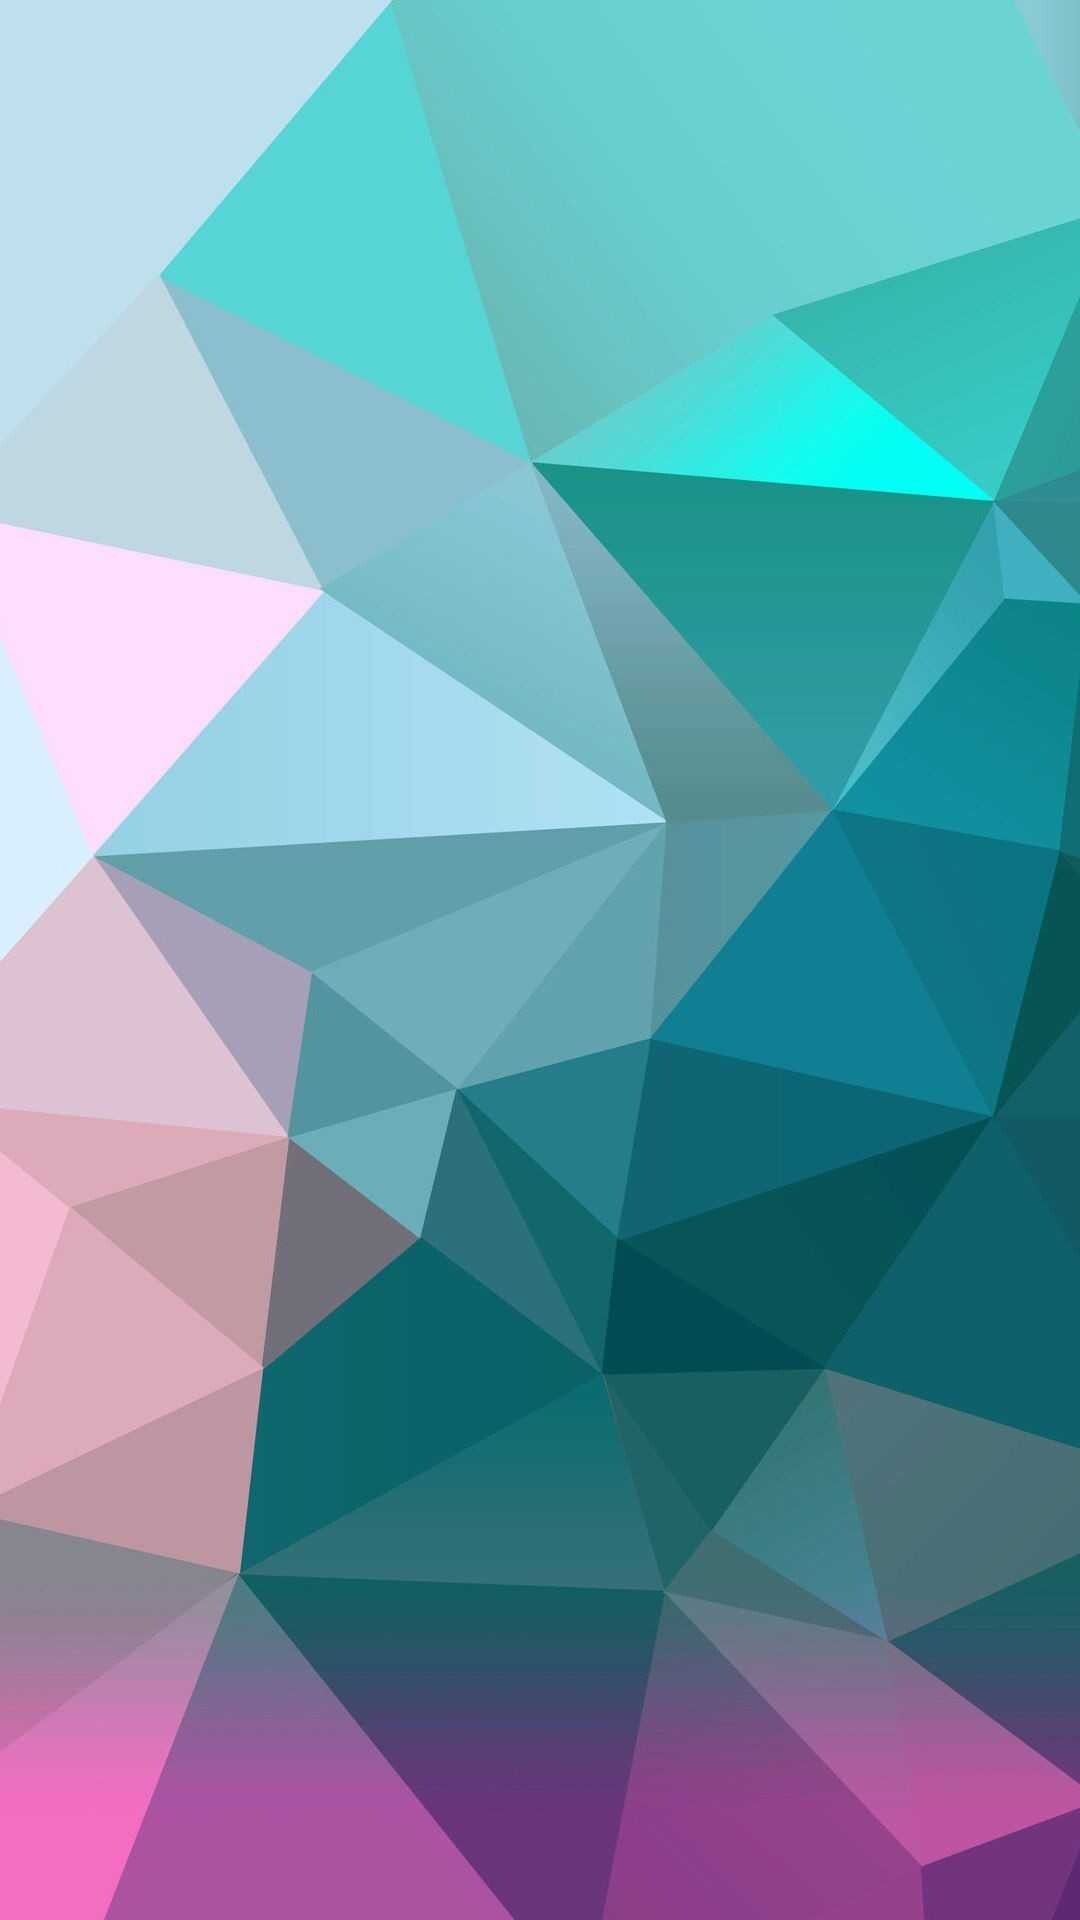 Geometry: Low polygonal art, Closed figures with three sides, Angles. 1080x1920 Full HD Background.